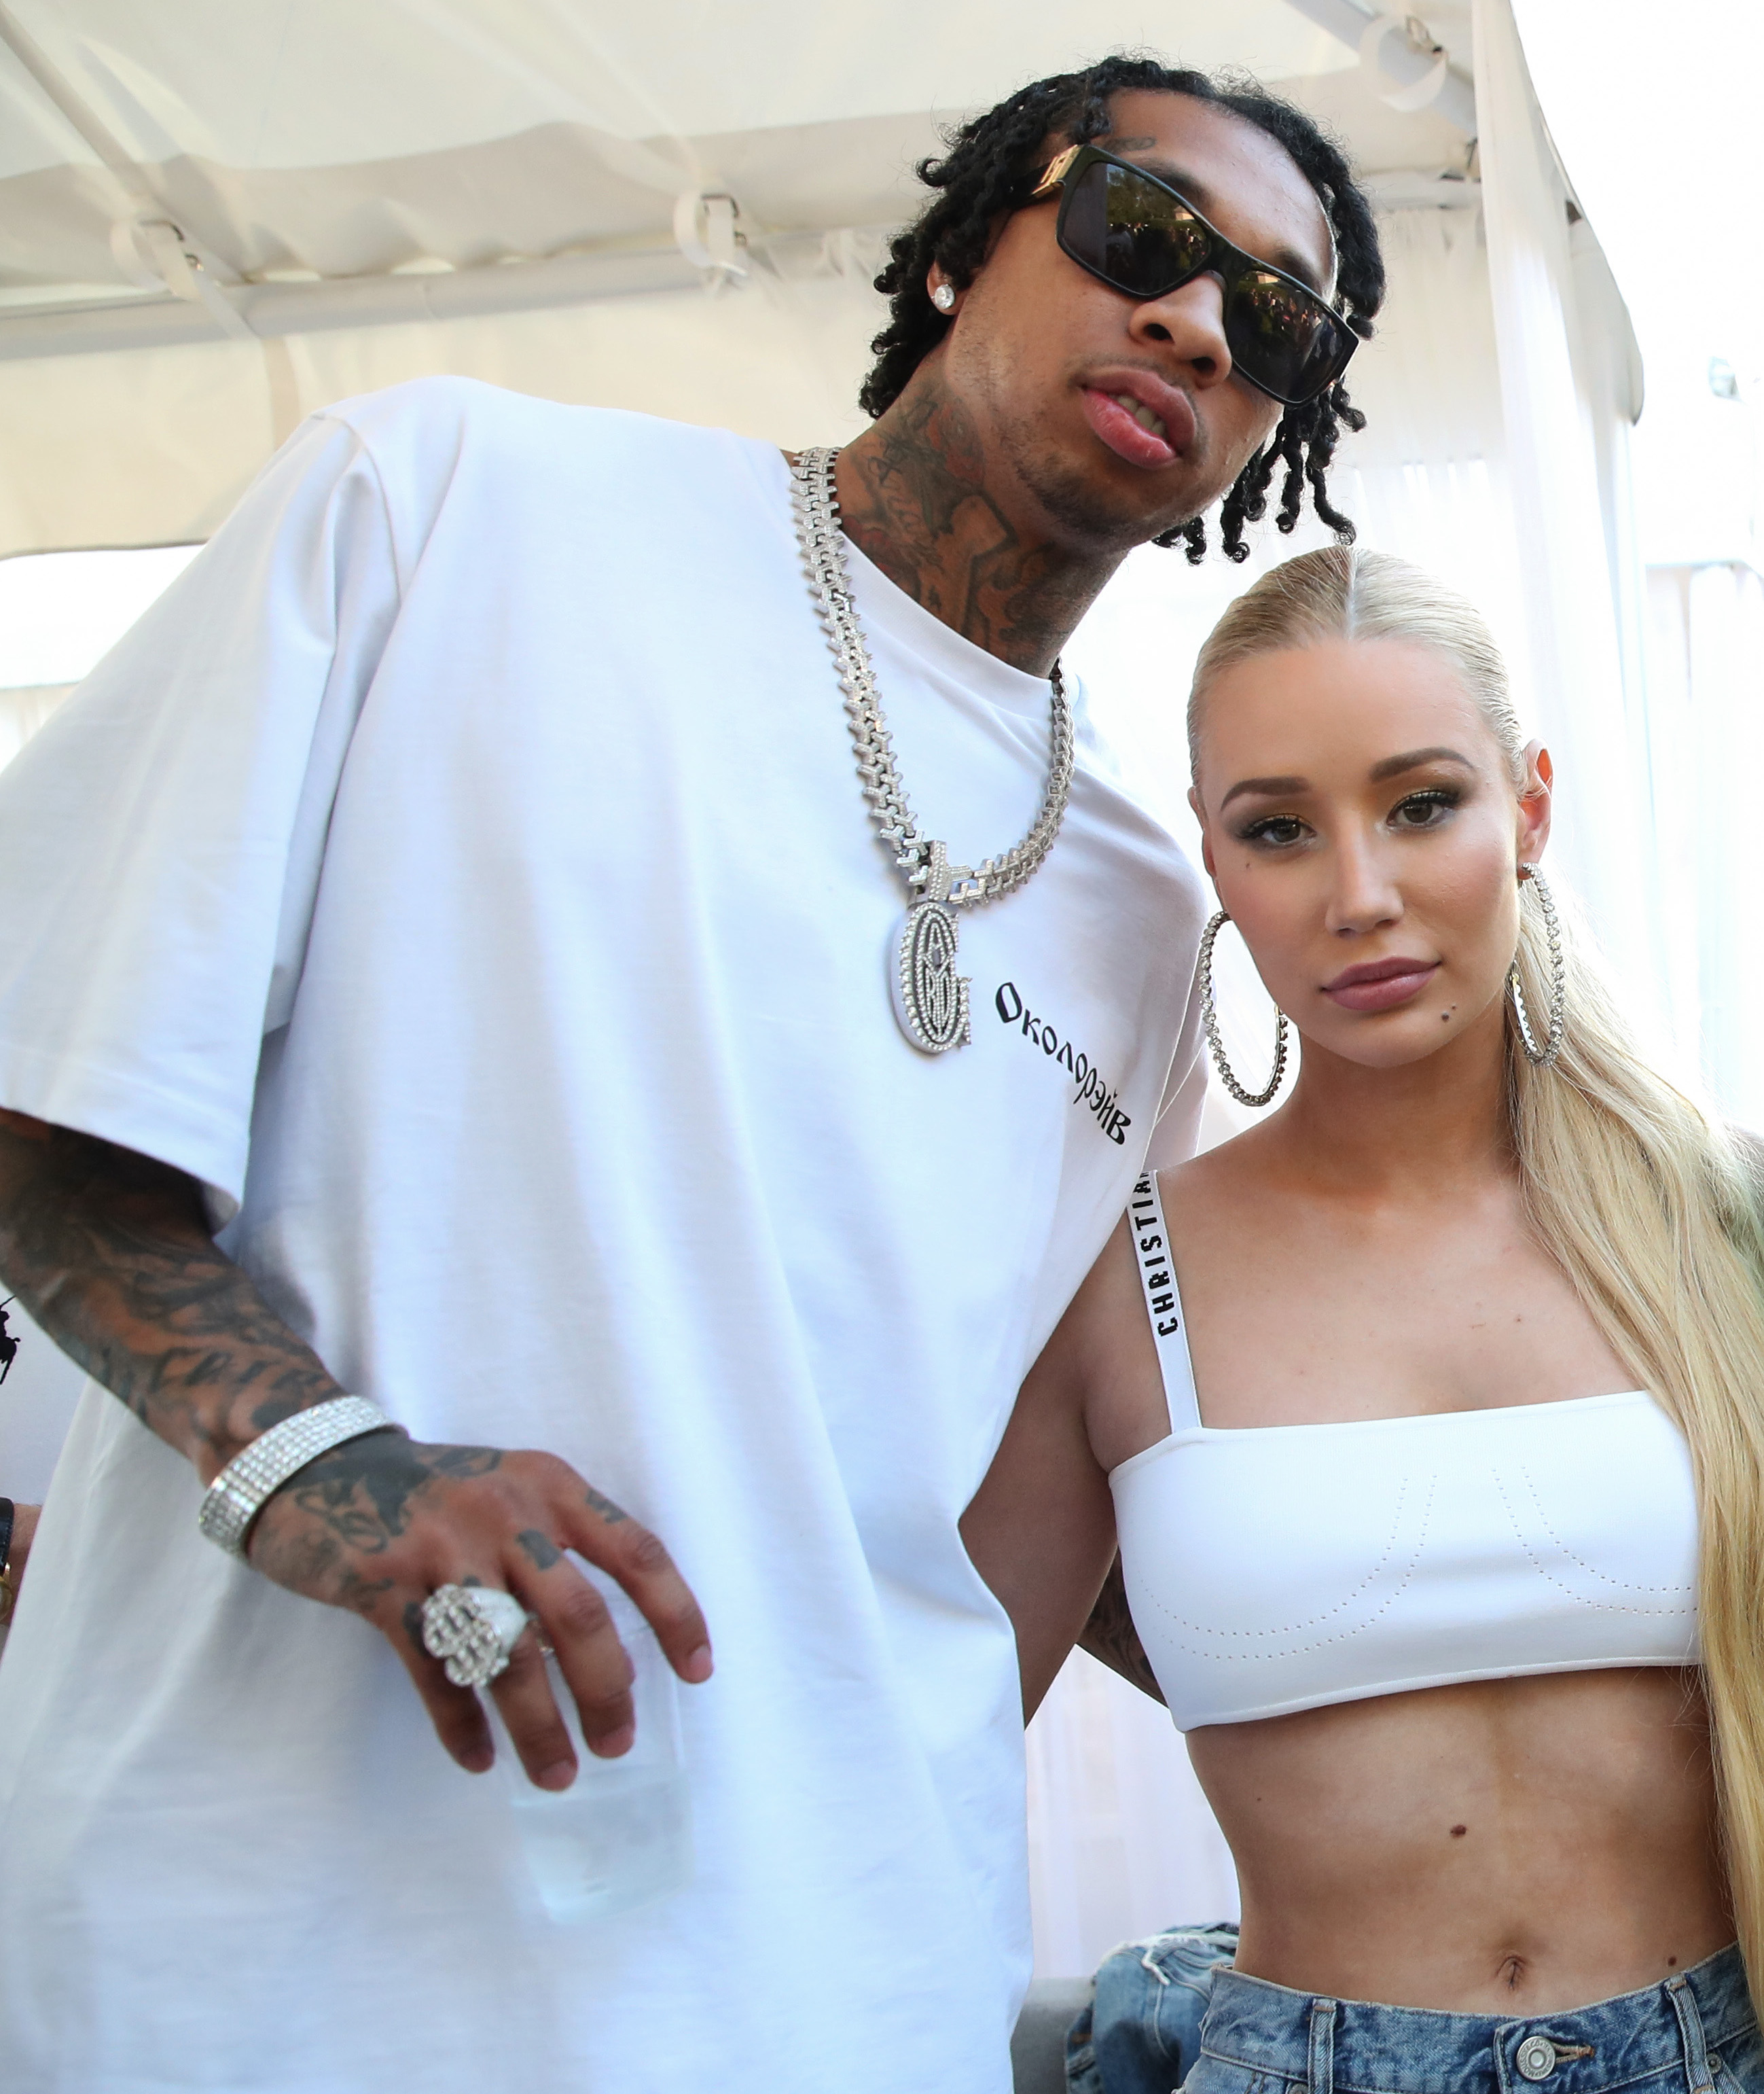 Iggy Azalea's Dating History See All Her Boyfriends and Exes